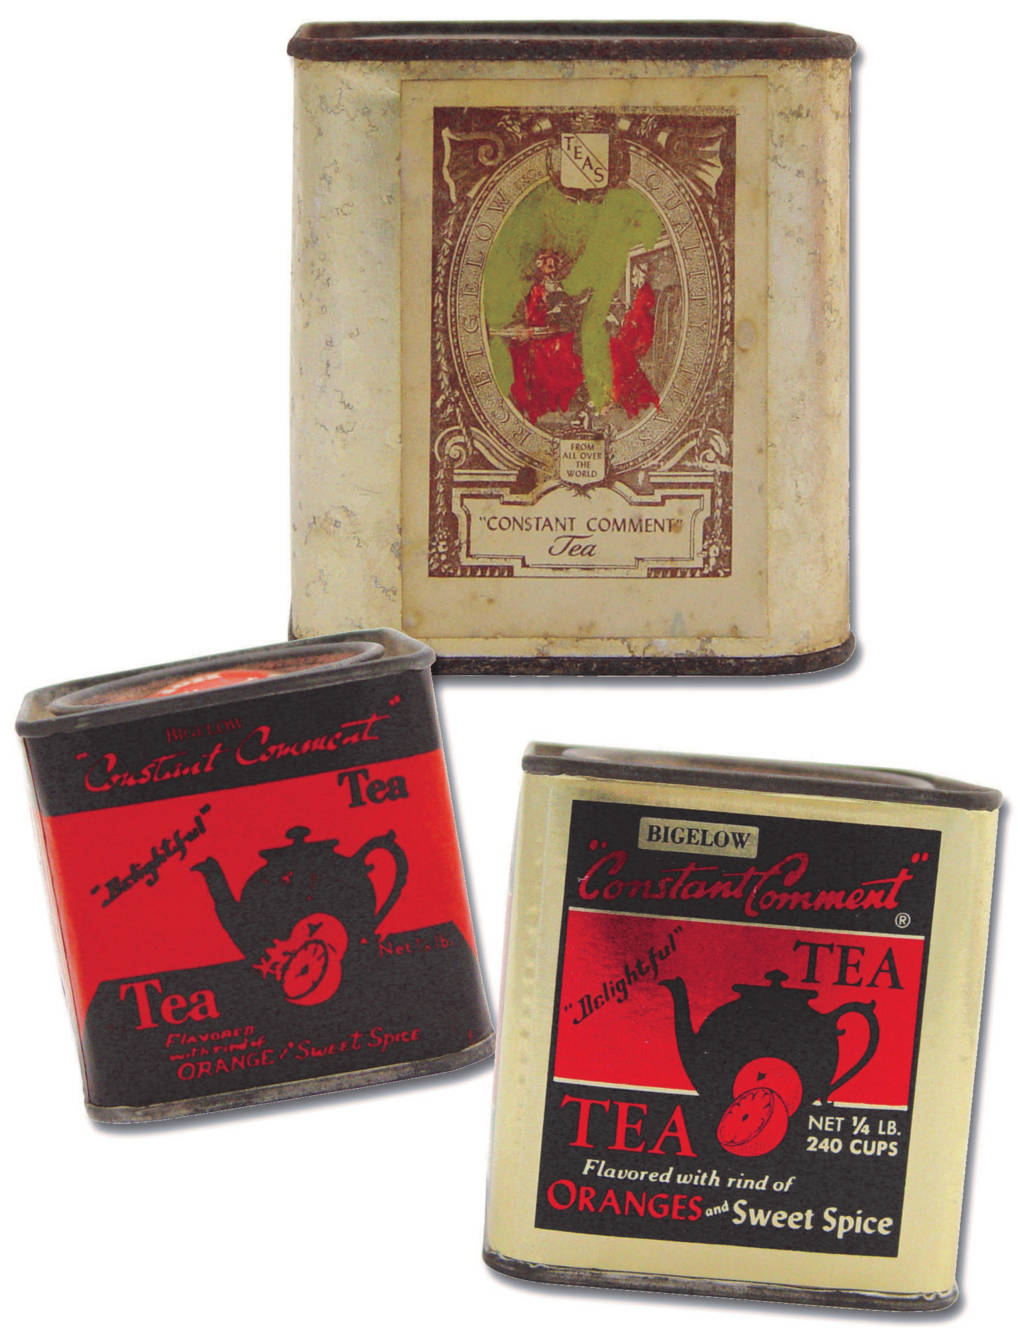 Constant Comment was first sold in tins wrapped in gold foil. The family could only afford single color labels for the first tea tins. So David Sr. and his son, David Jr., would hand-paint the red ladies on the labels.